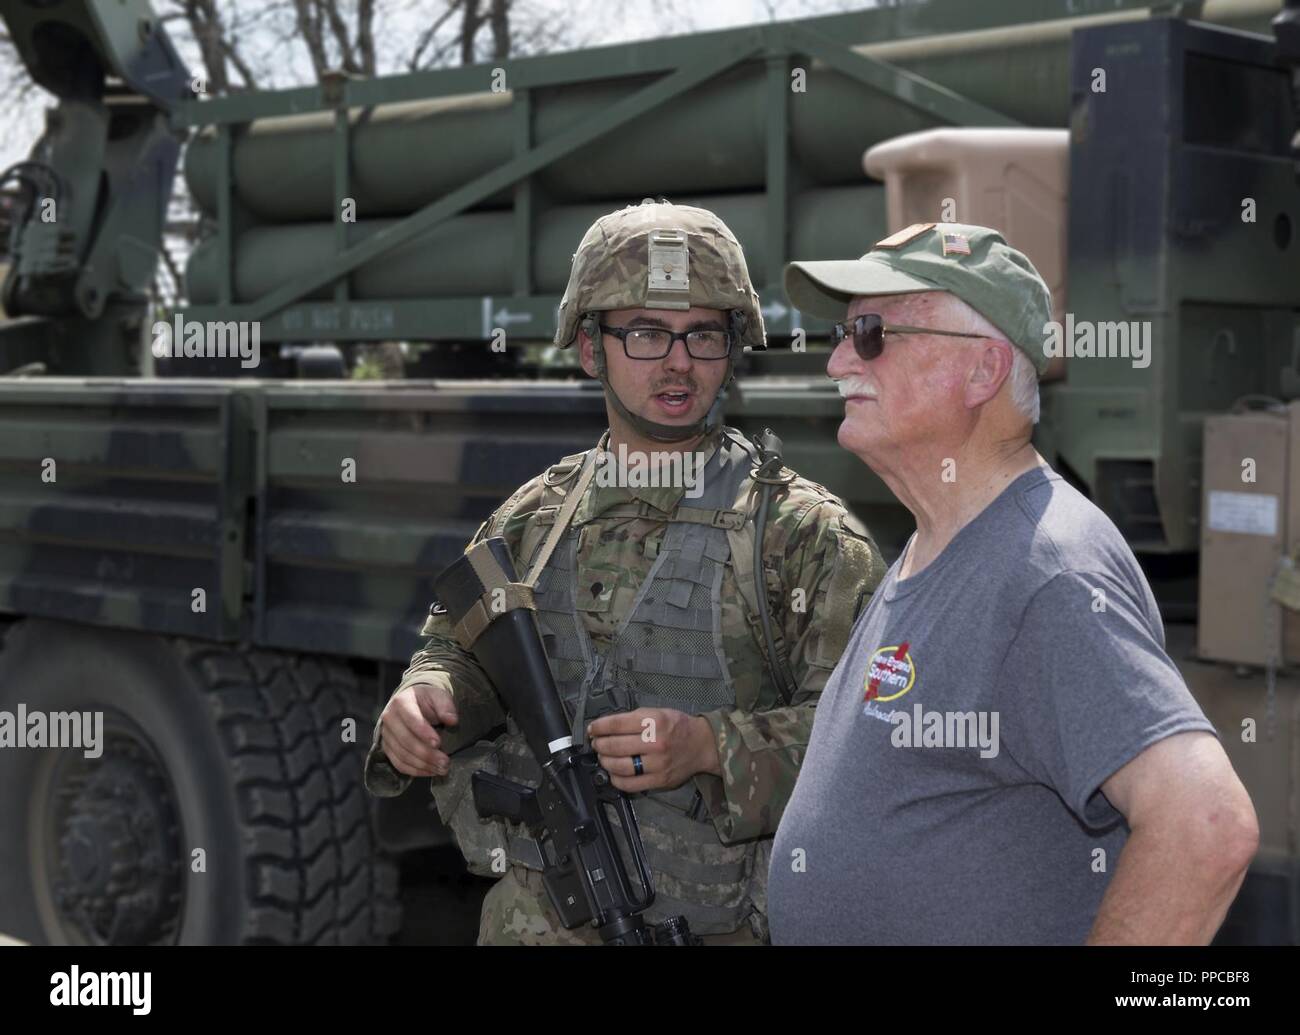 Army Spc. Caulin L. Gagne, a muliti-launch rocket system crewman assigned to the 197th Field Artillery Brigade, answers questions about a weapon system on Aug. 14, 2018 at a traiining site on Camp Grayling, Mich. Peter Dearness, the owner of New England Southern Railroad, visited the 197th FAB during their annual training as part of a tour with the N.H. Employer Support of the Guard and Reserve. ( Stock Photo